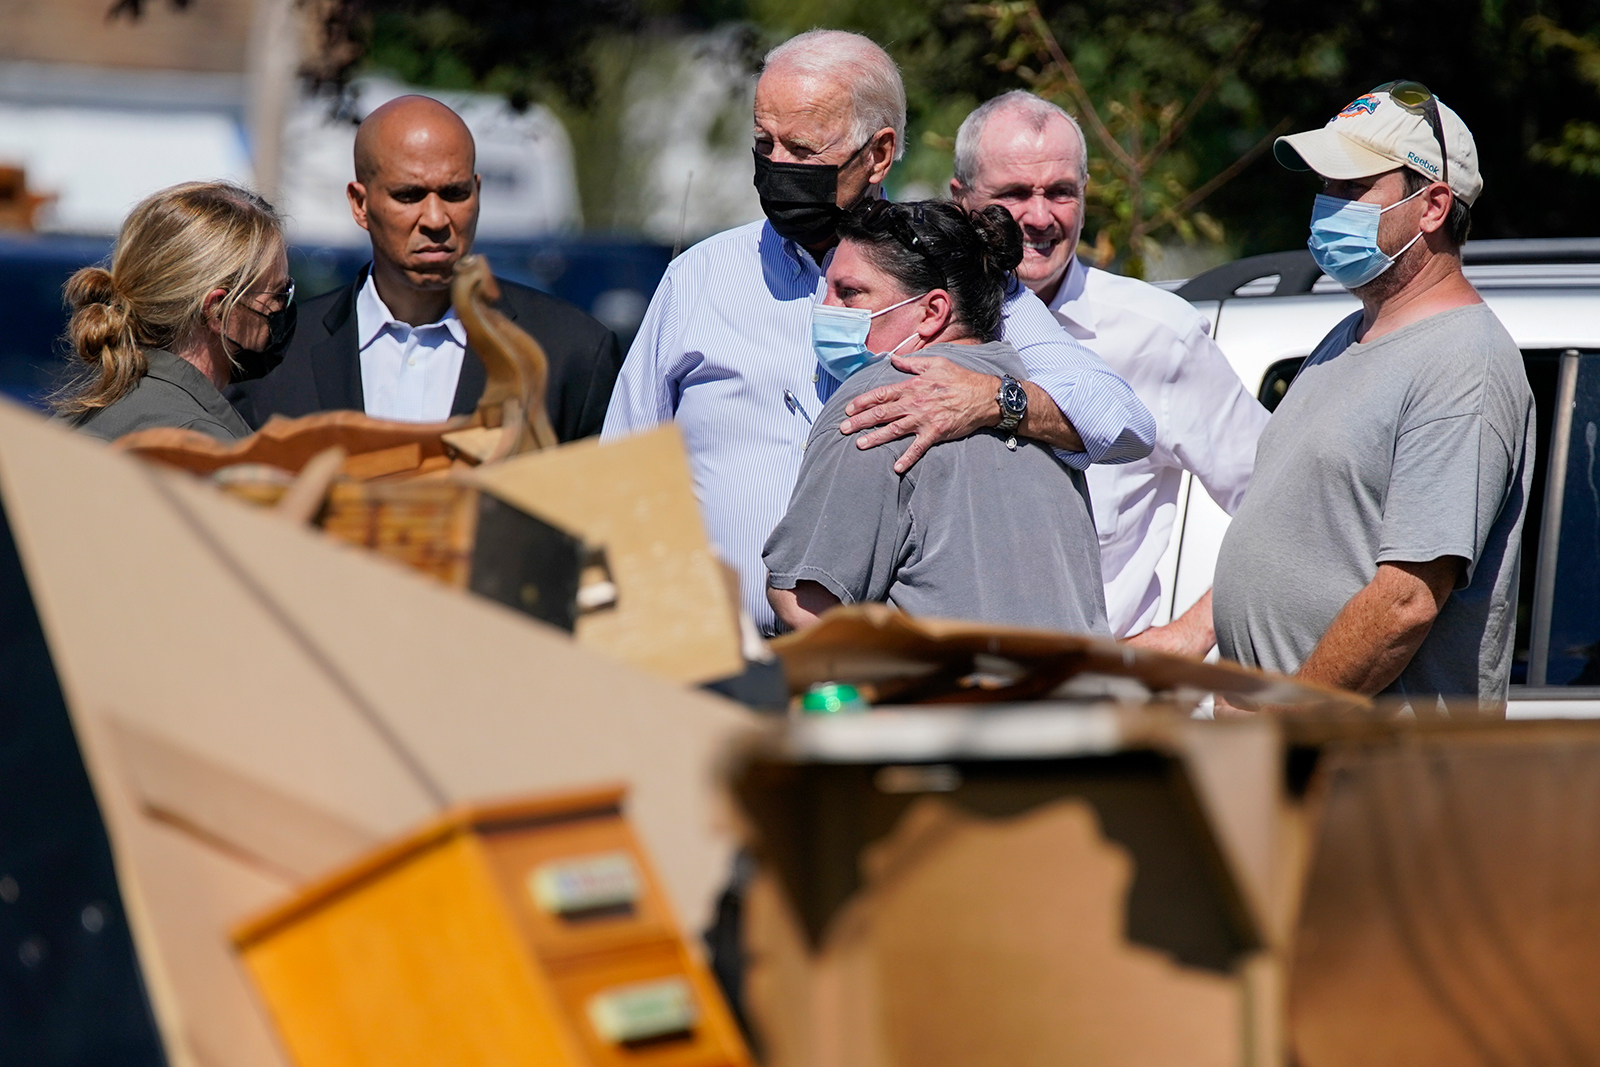 President Joe Biden hugs a person as he tours a neighborhood impacted by Hurricane Ida, on Tuesday, September 7 in Manville, New Jersey.